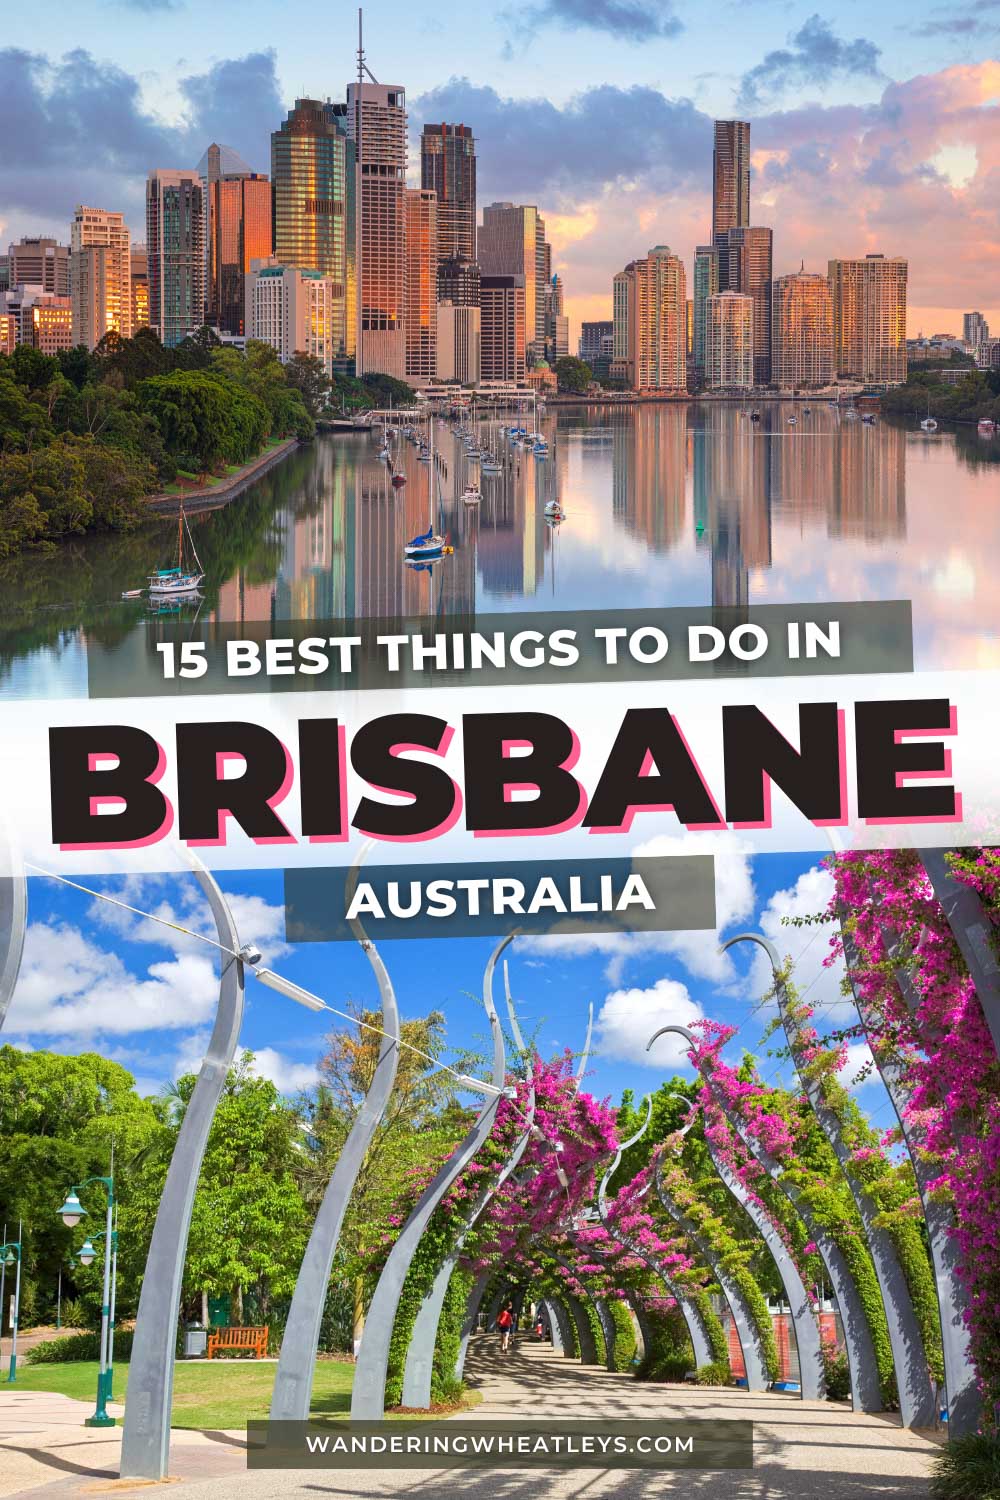 The Best Things to do in Brisbane, Australia